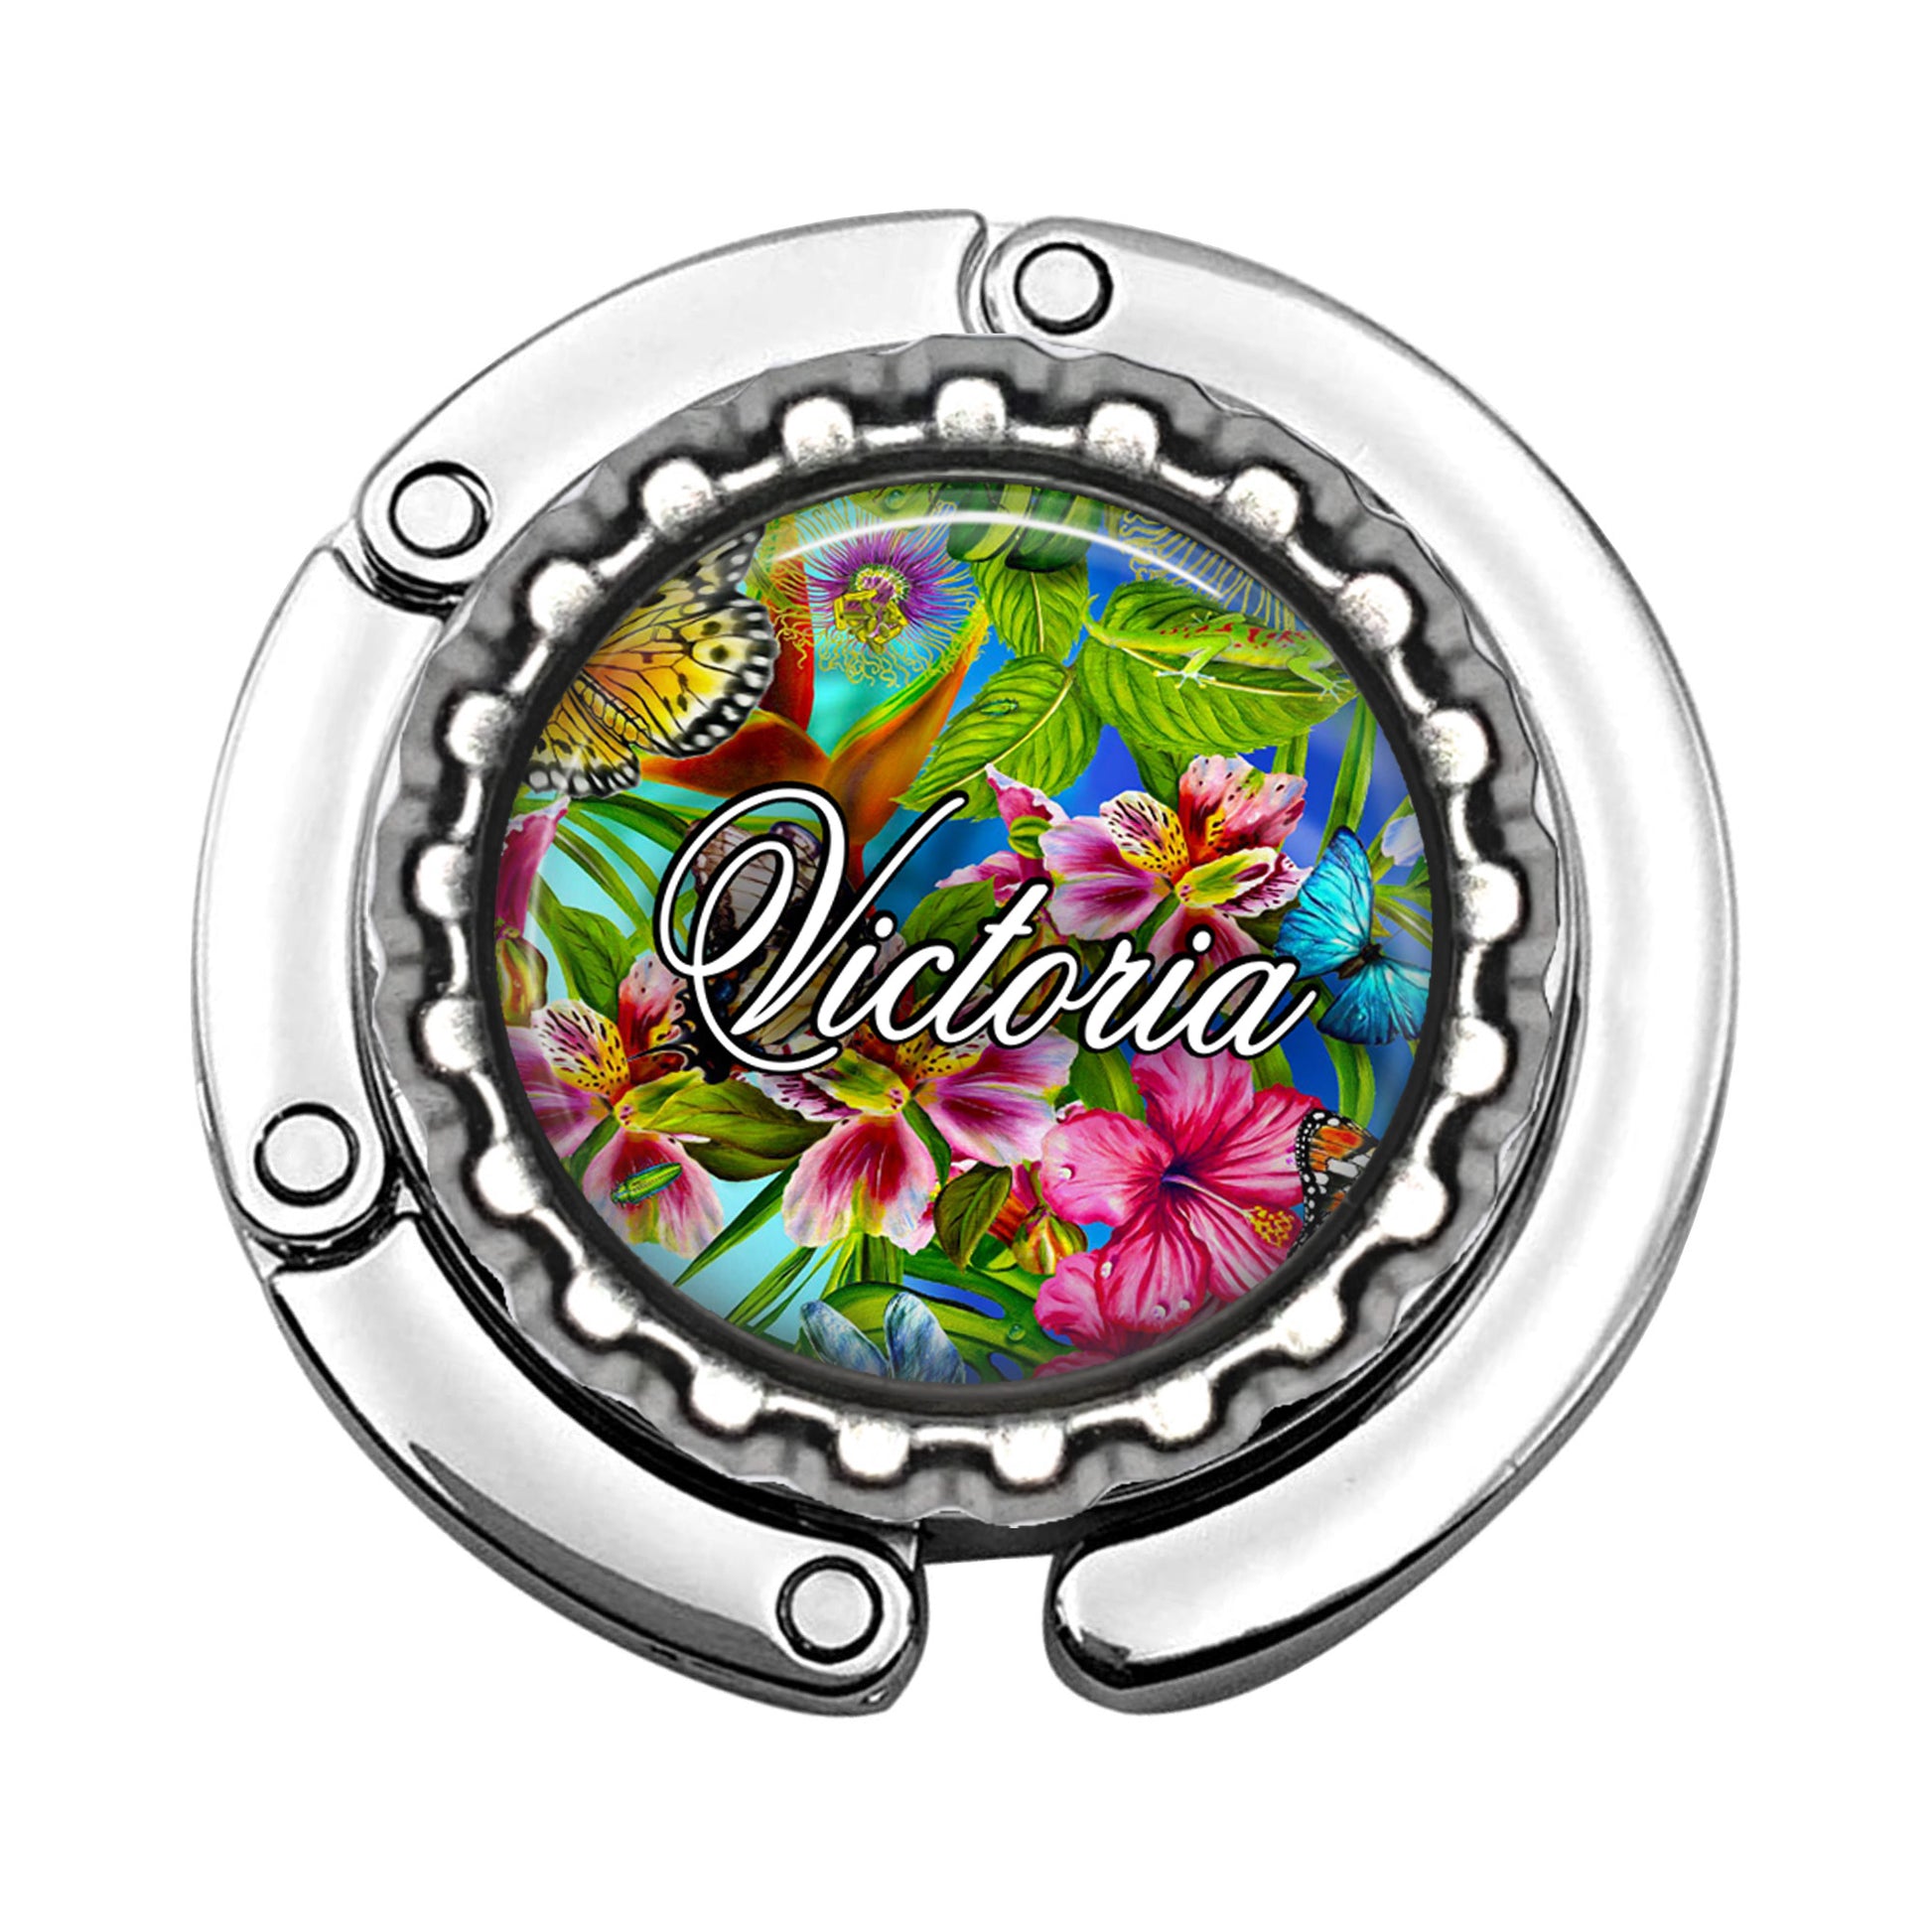 a metal object with flowers and butterflies on it